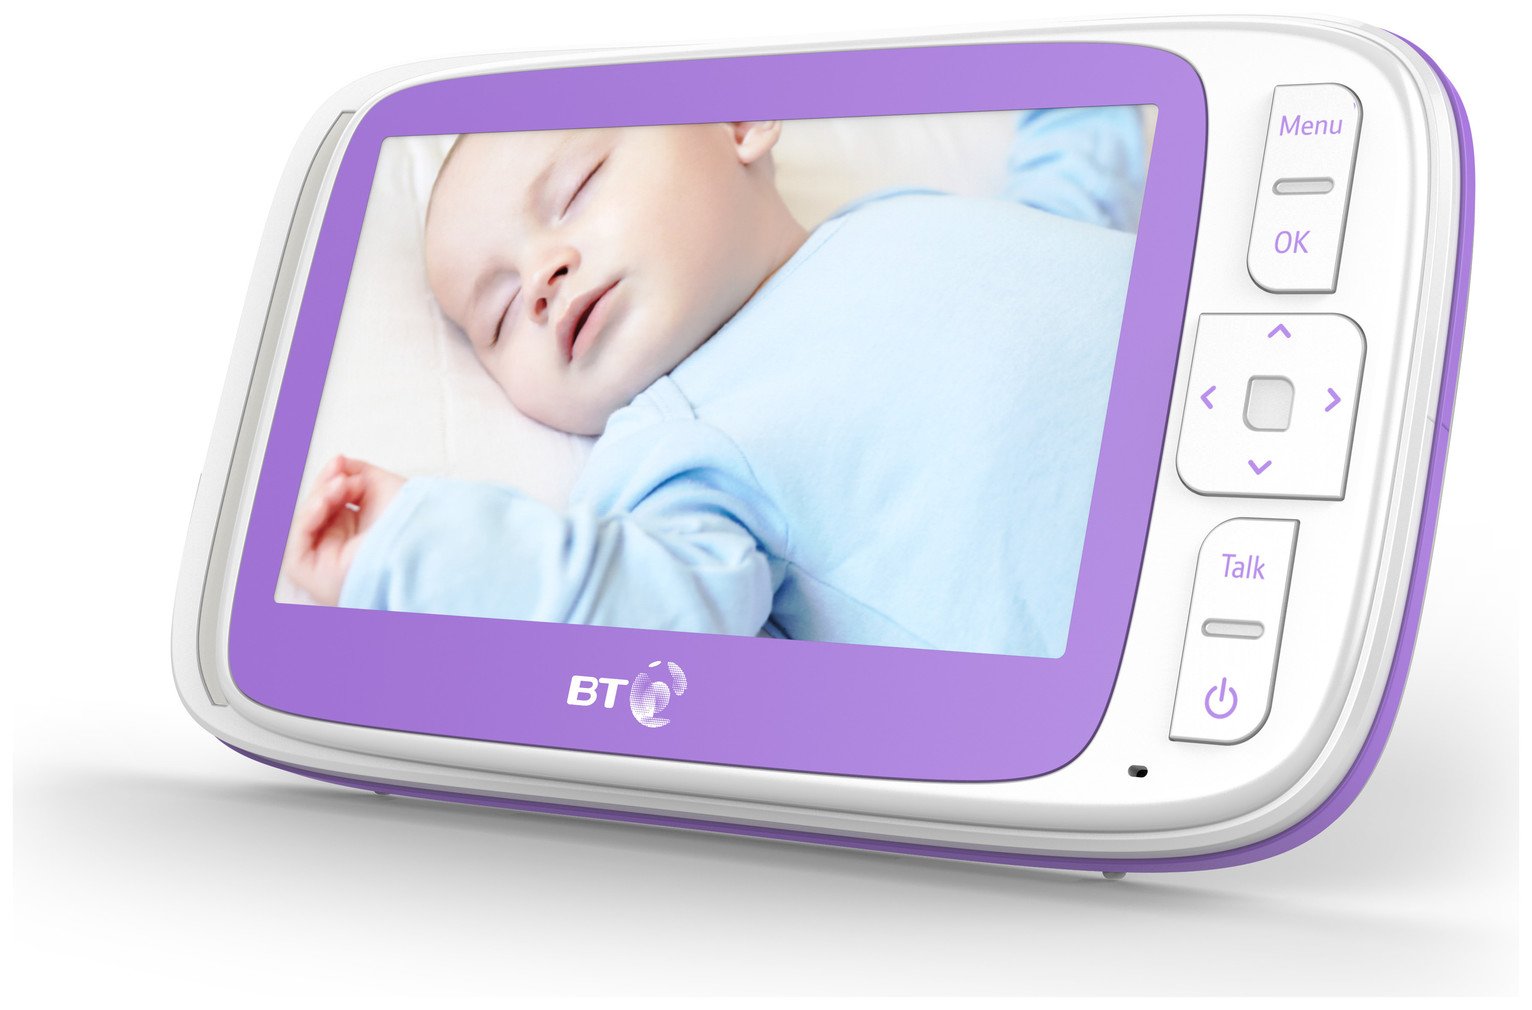 BT 6000 Video 5 Inch Baby Monitor Review